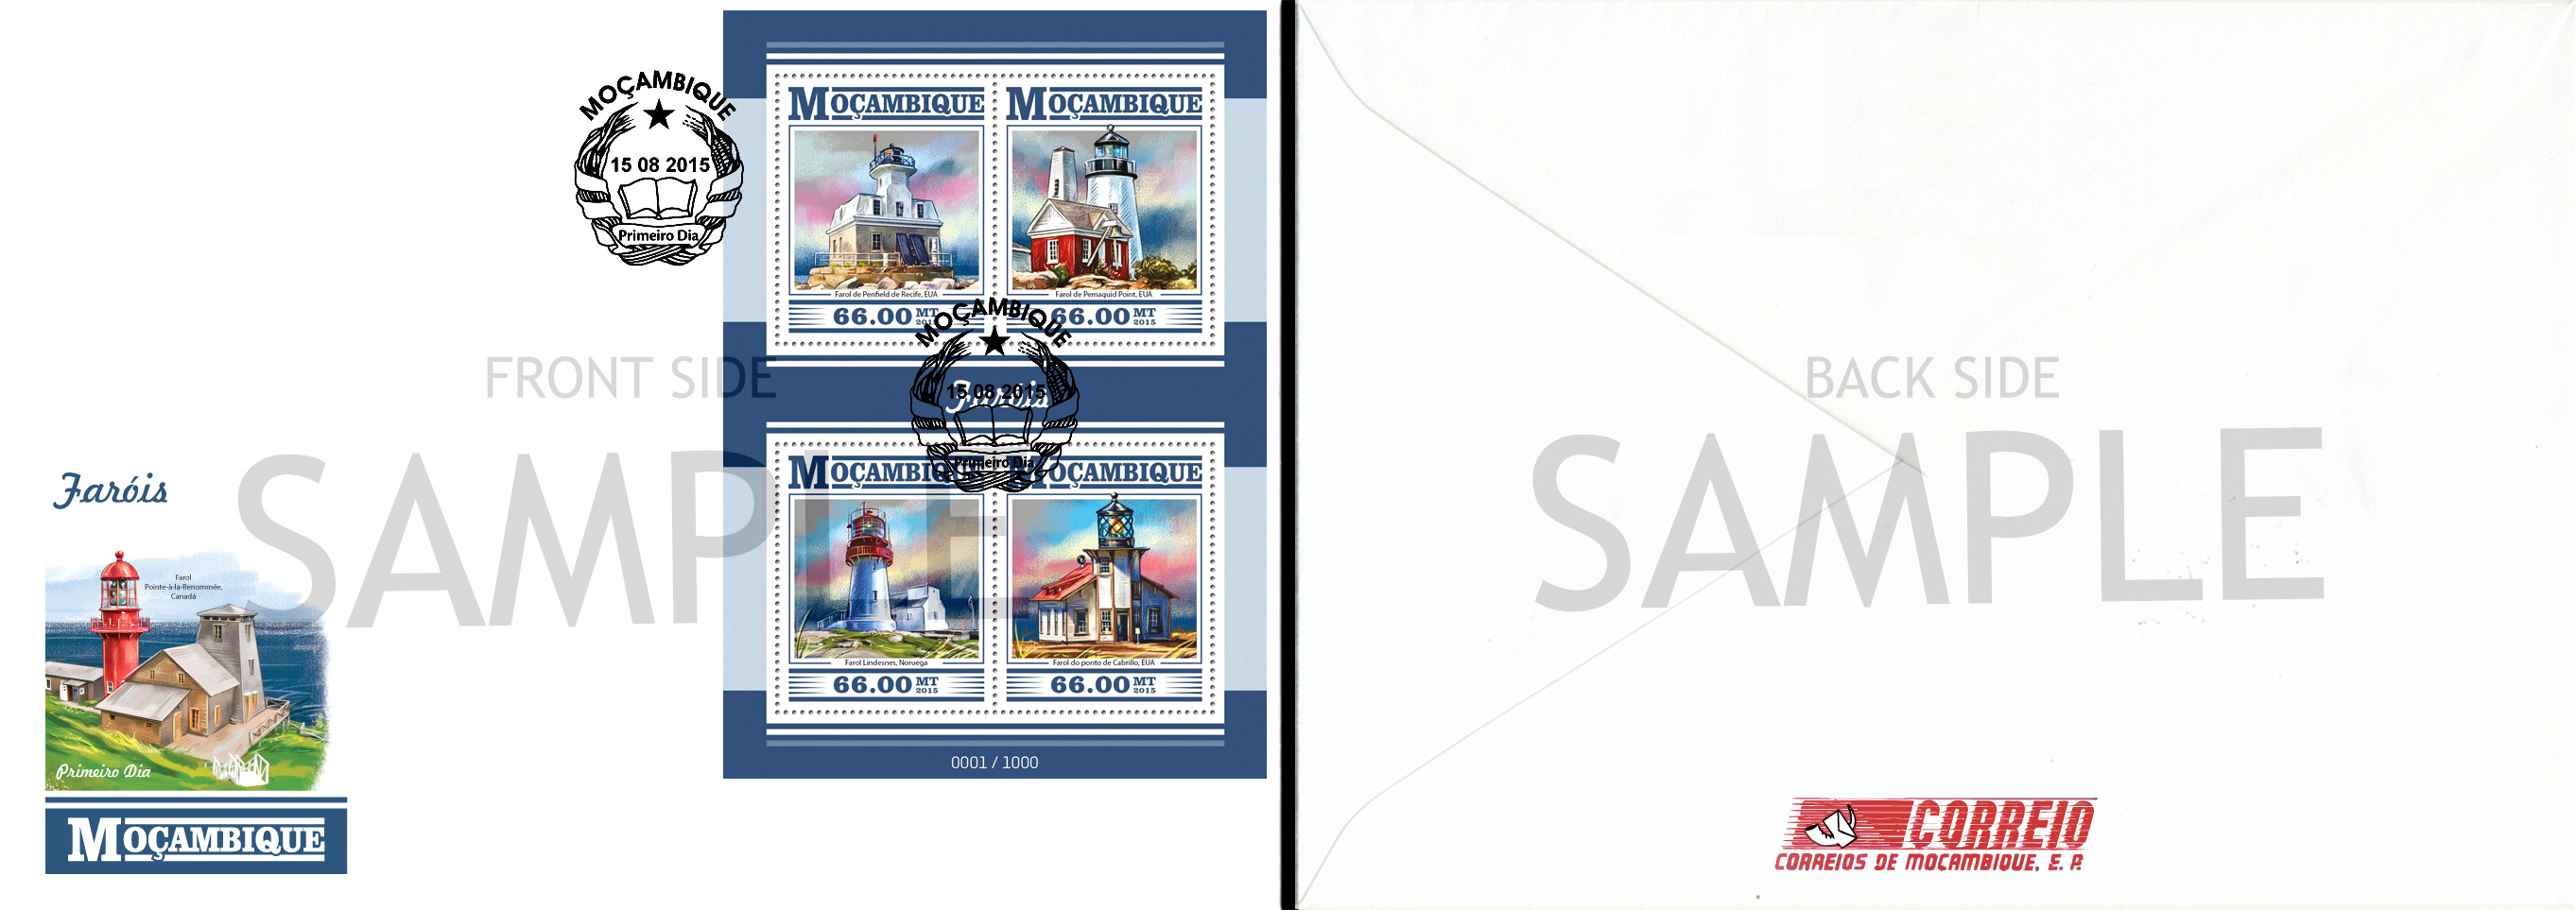 Sample of FDC - Issue of Mozambique postage Stamps